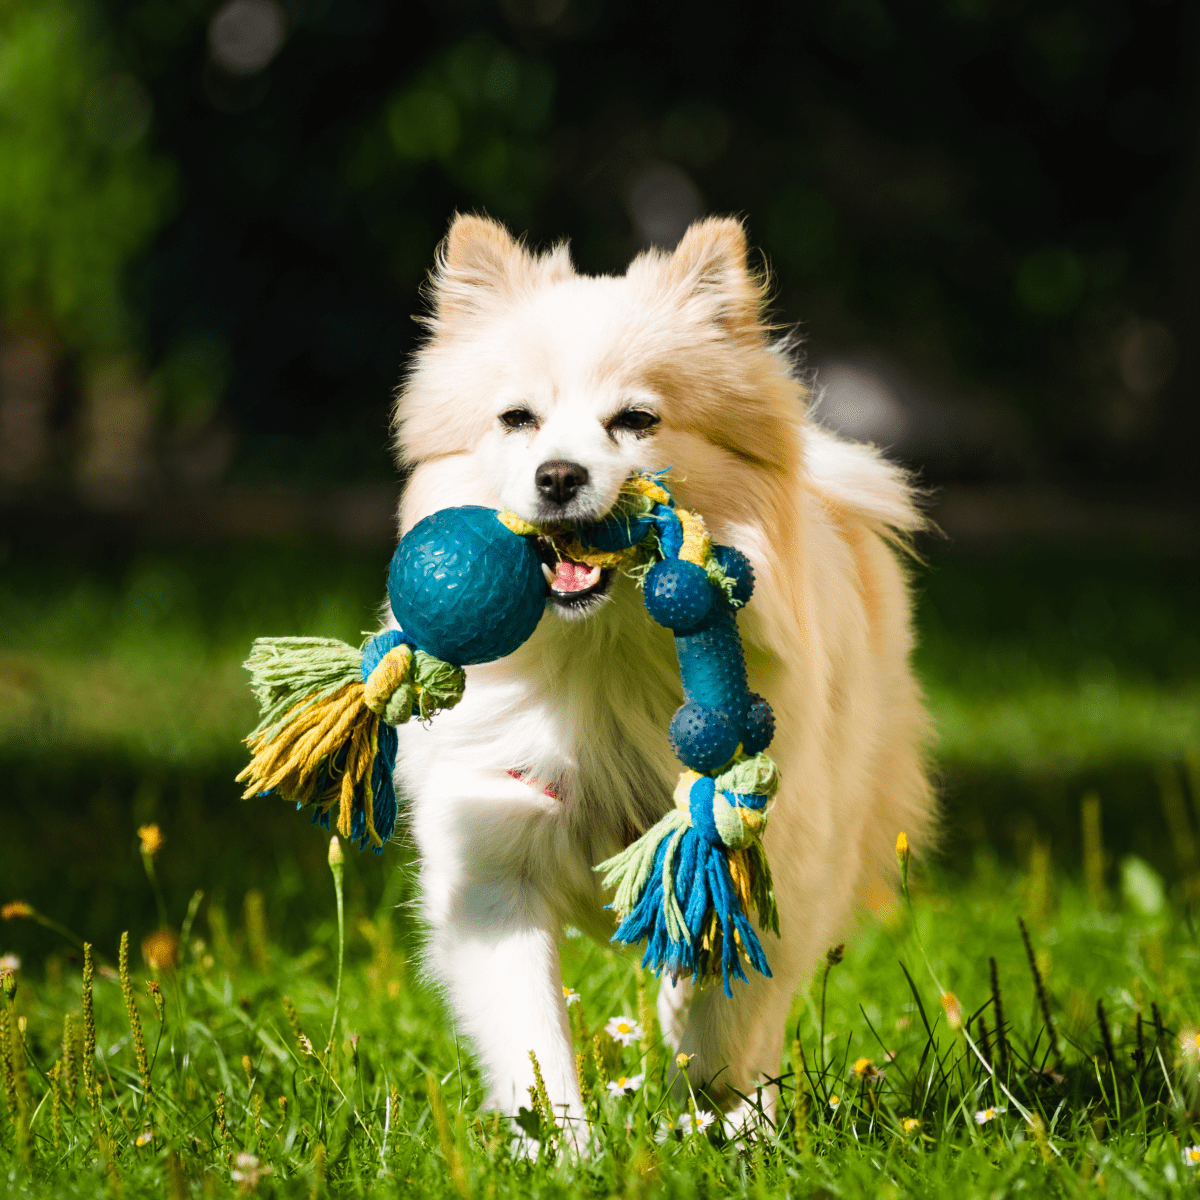 5 Reasons Why Dogs Bury Bones & Toys in the Dirt (or Bed)